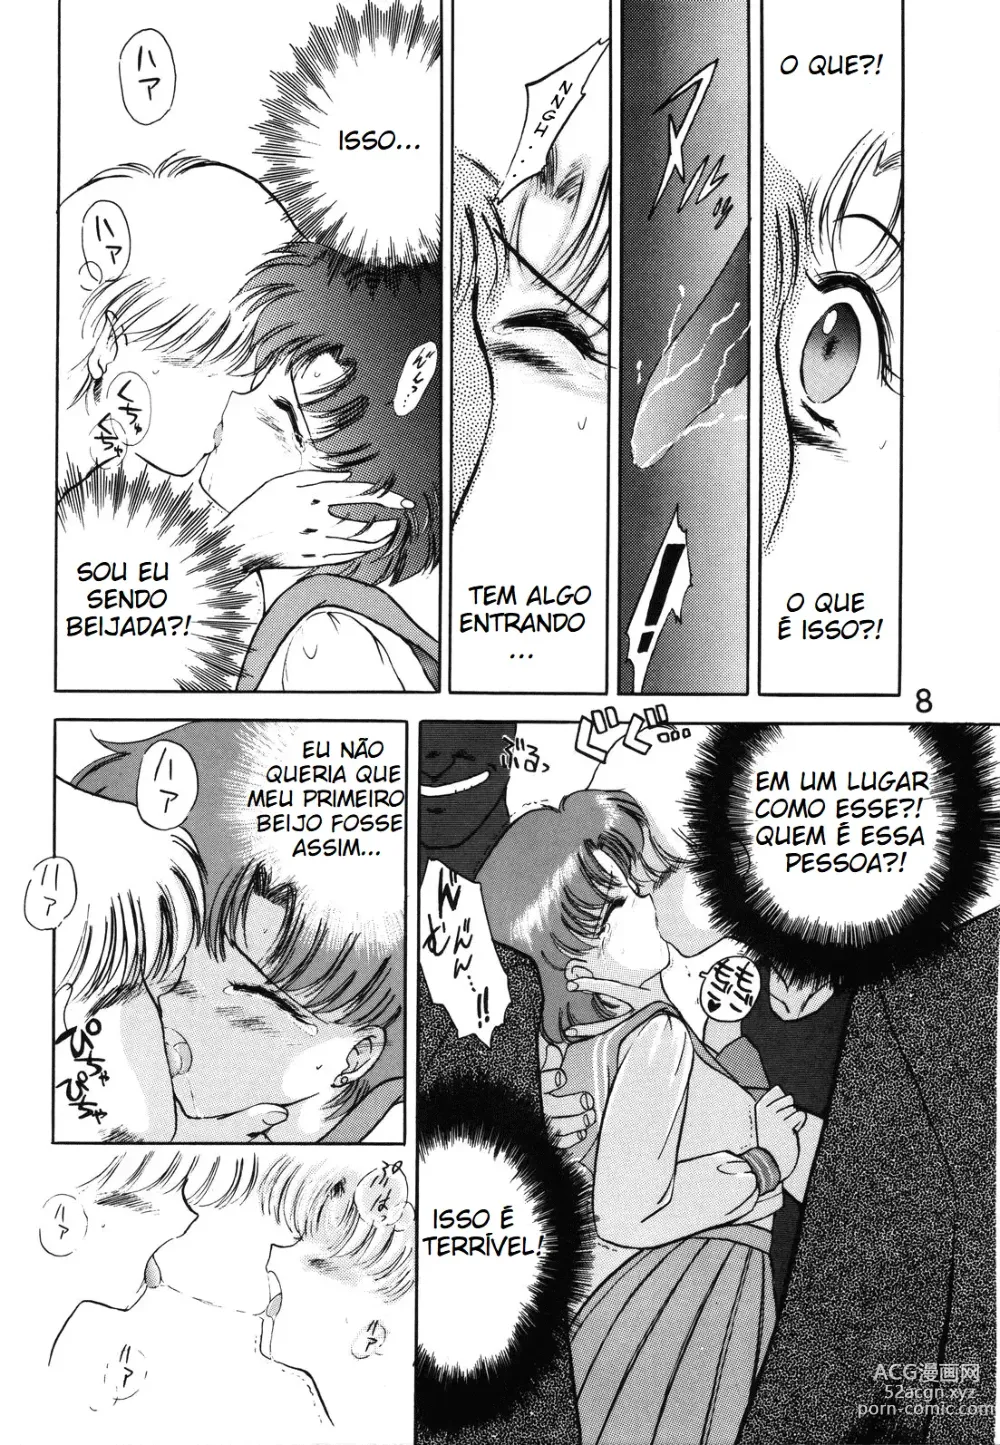 Page 7 of doujinshi Submission Mercury Plus